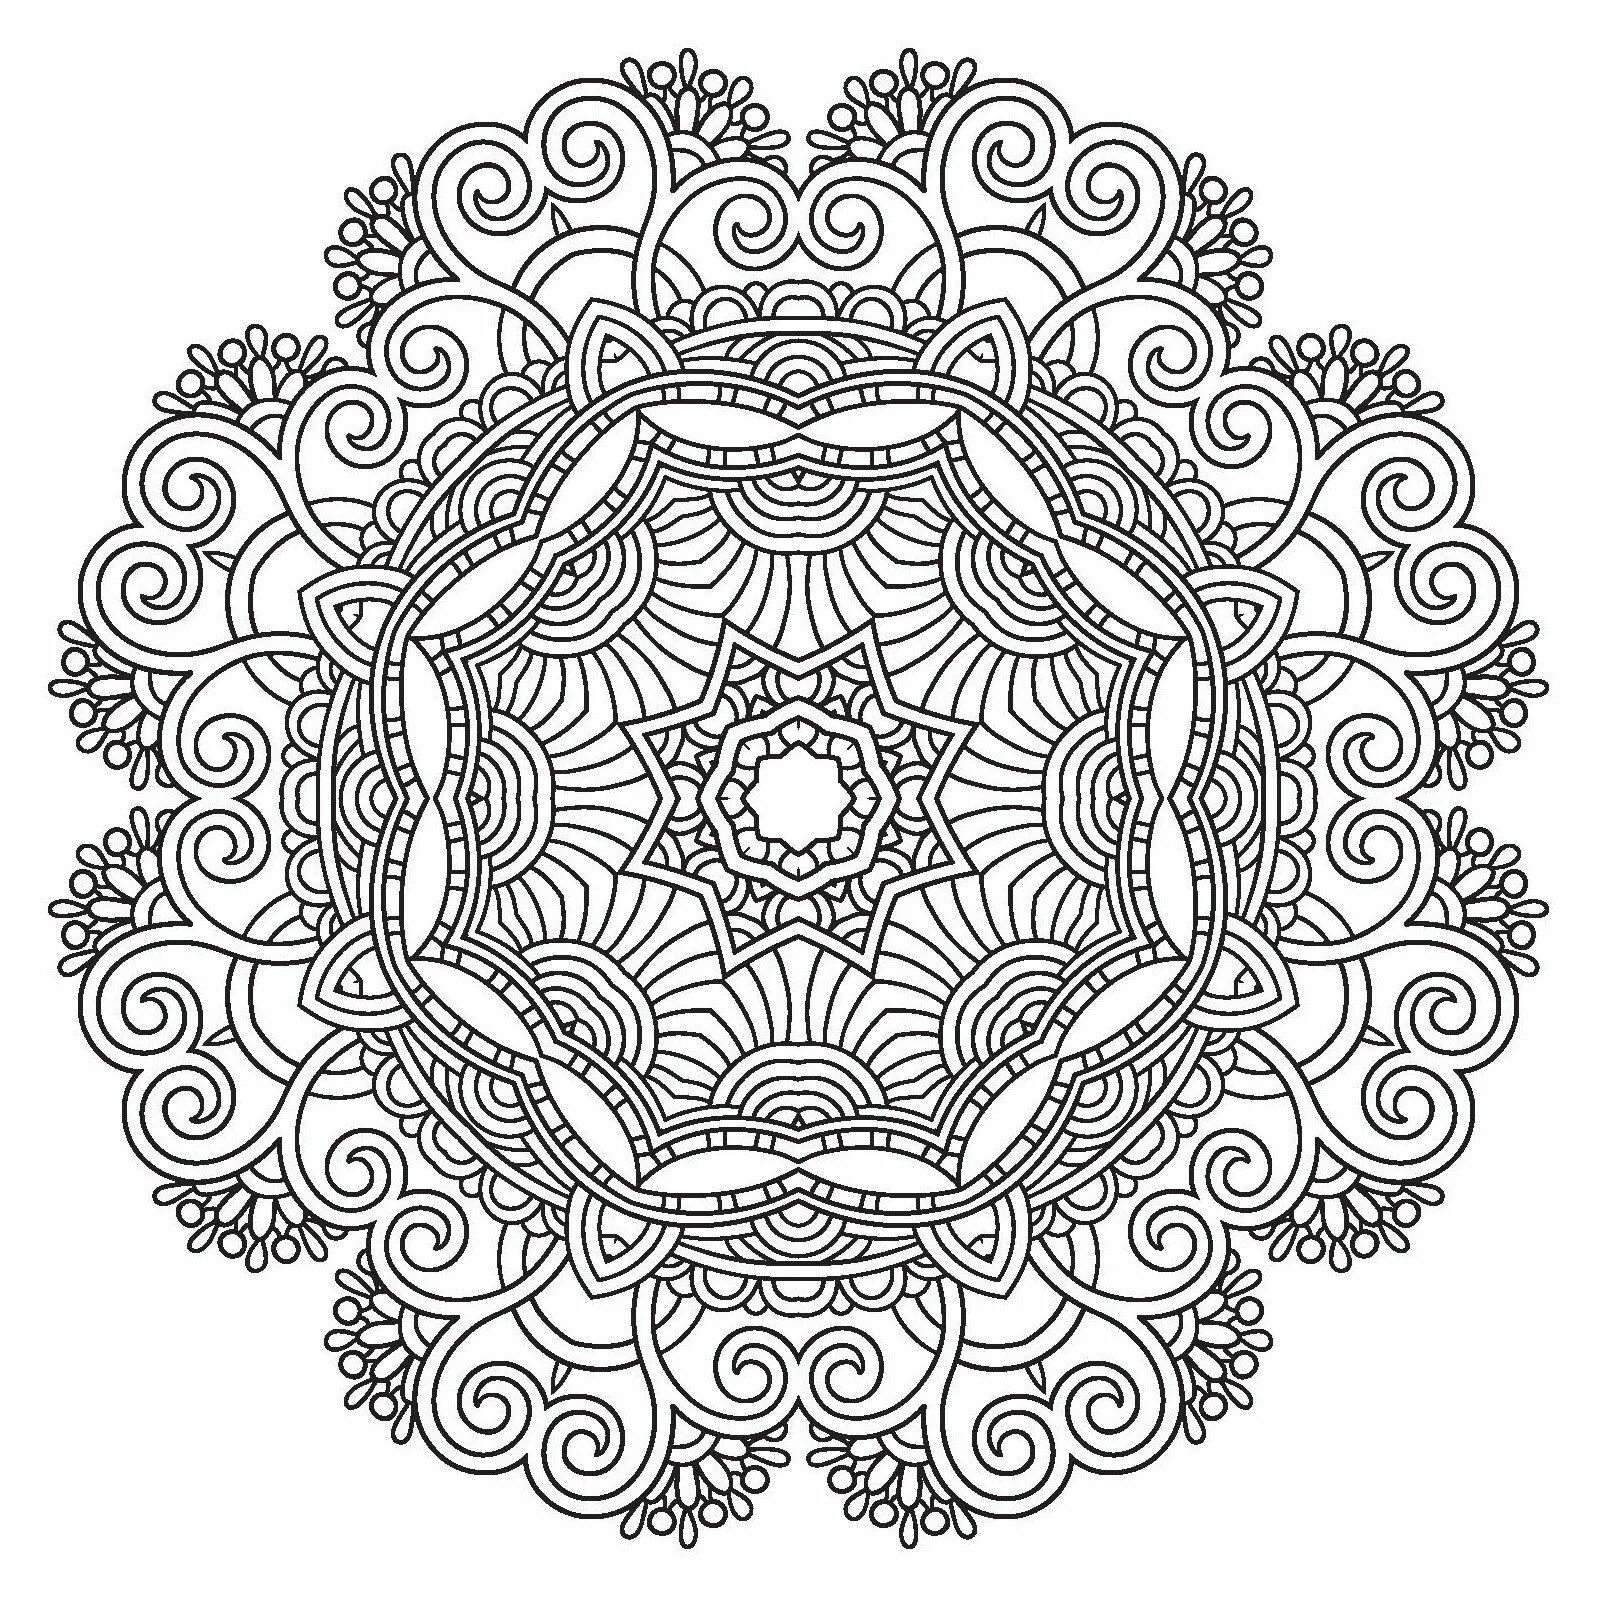 Coloring tranquil mandala peace and tranquility